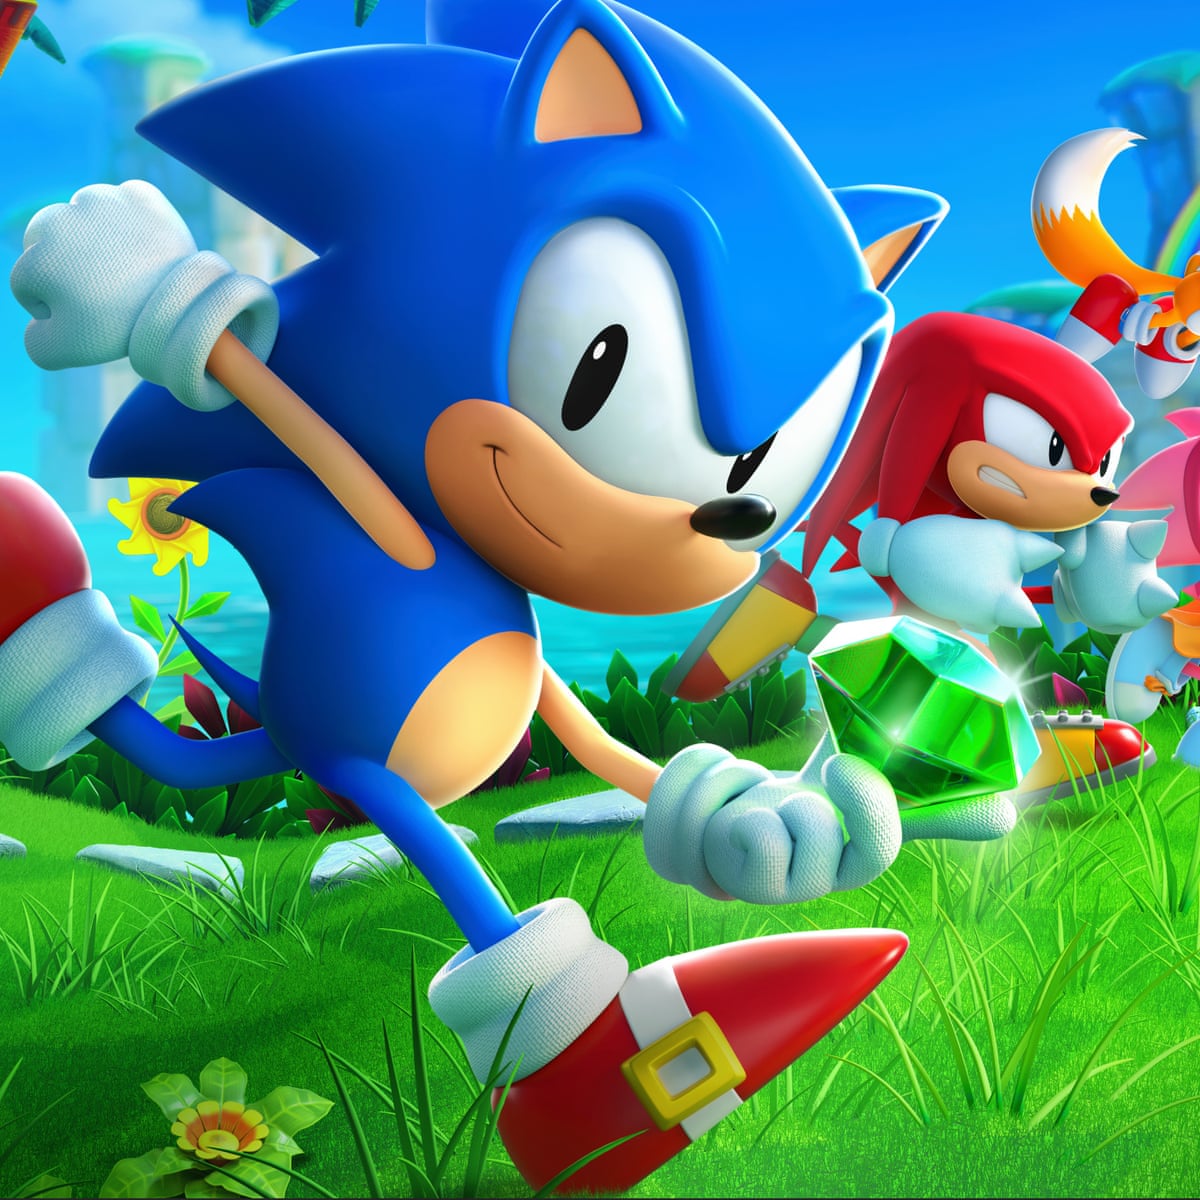 Cool, timeless and enigmatic': Sonic the Hedgehog's creators on